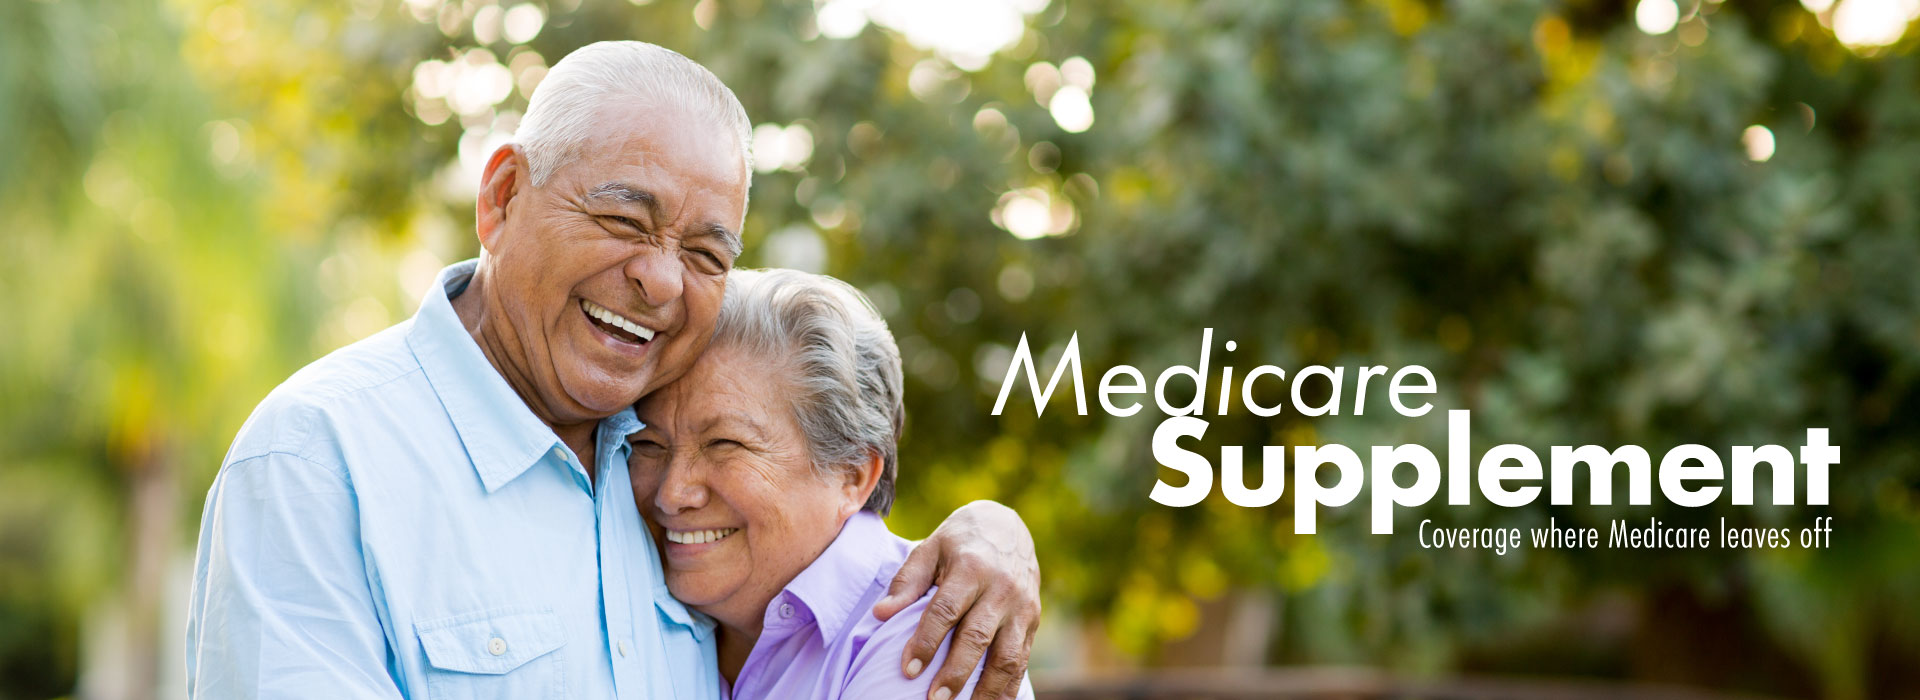 Americo Medicare Supplement, Coverage where Medicare leaves off